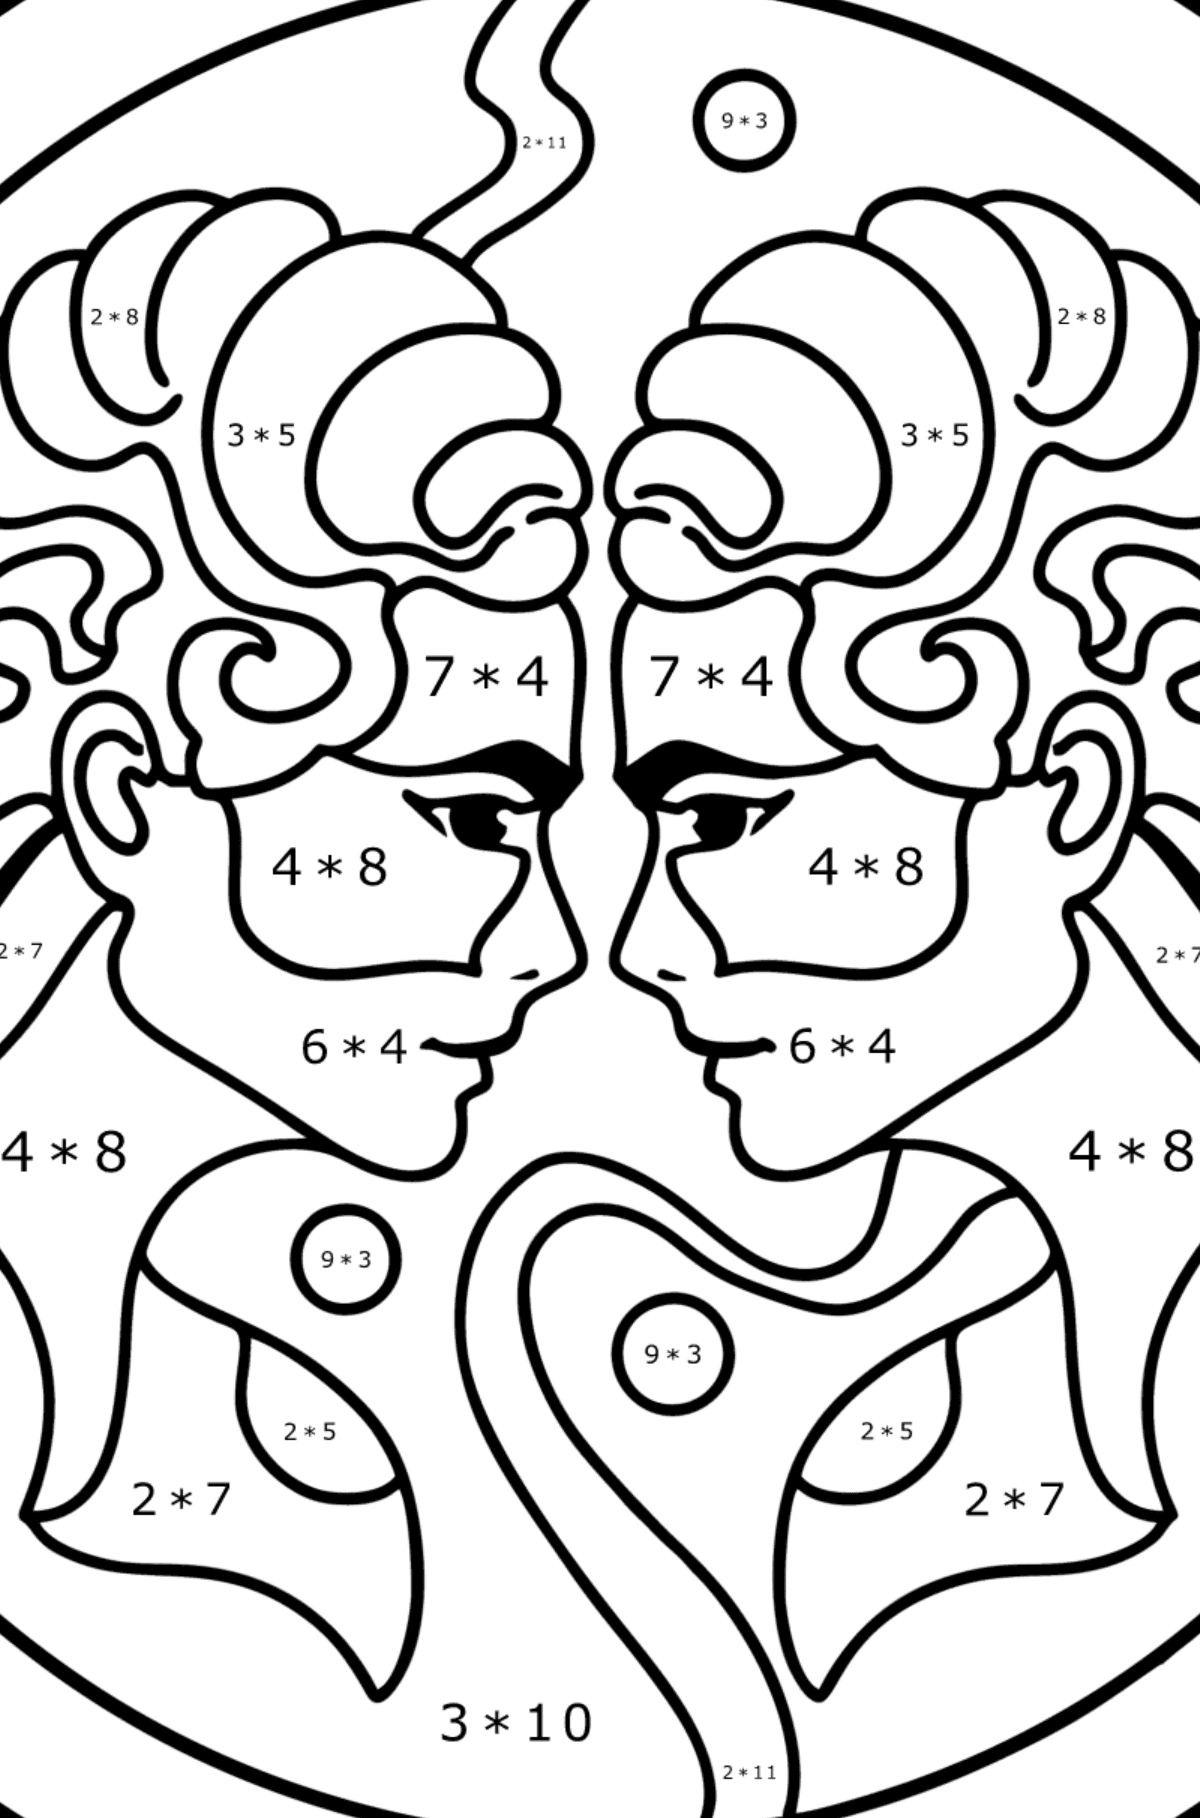 Coloring page for kids - Gemini zodiac sign - Math Coloring - Multiplication for Kids